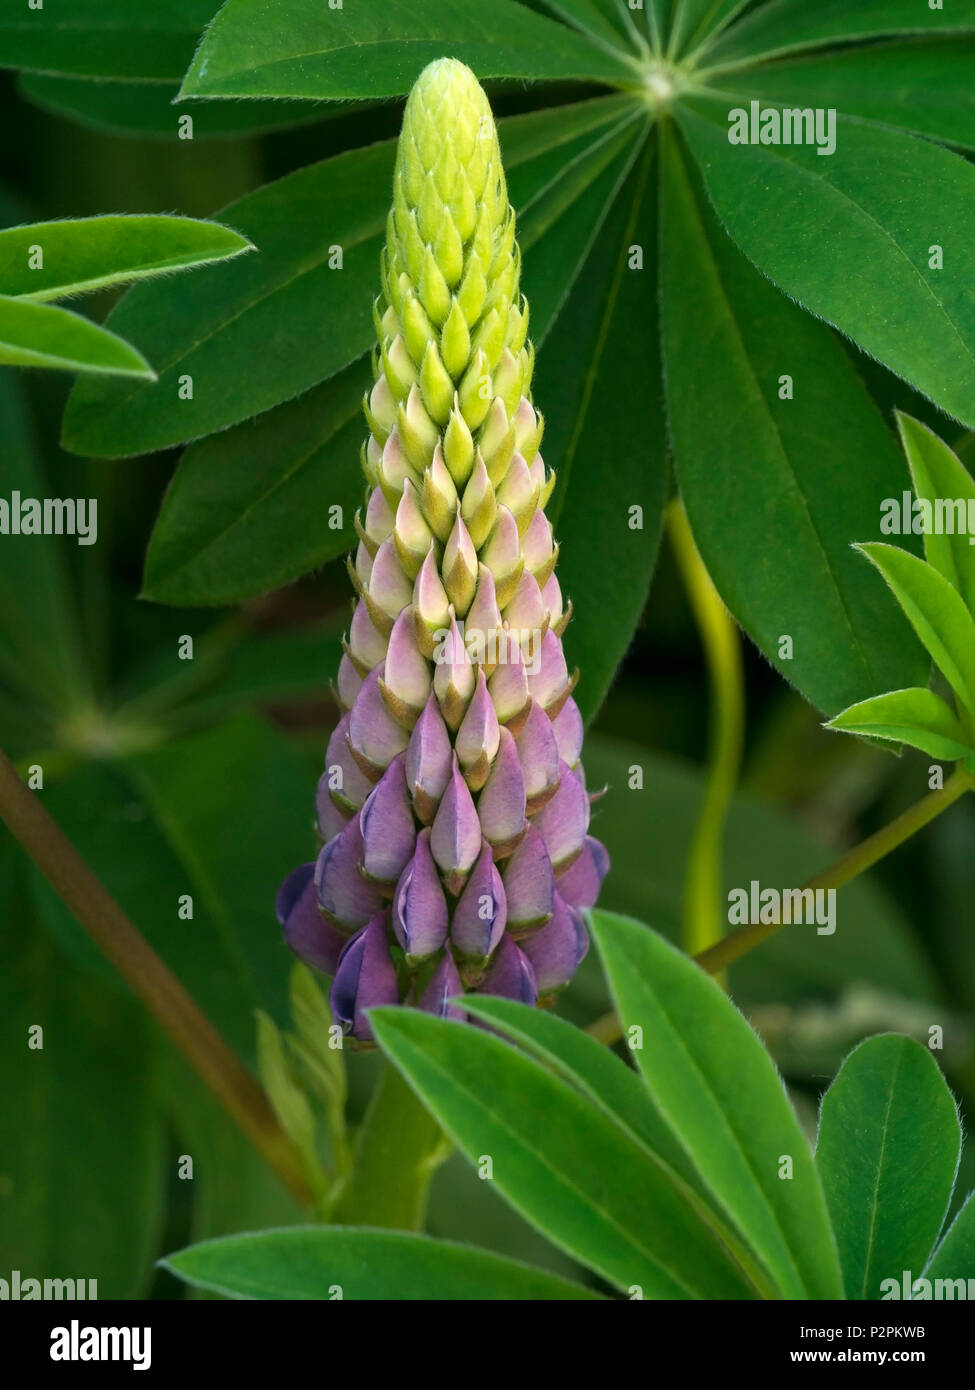 Closeup of single Lupin flower spur in English garden, Leicestershire, UK Stock Photo